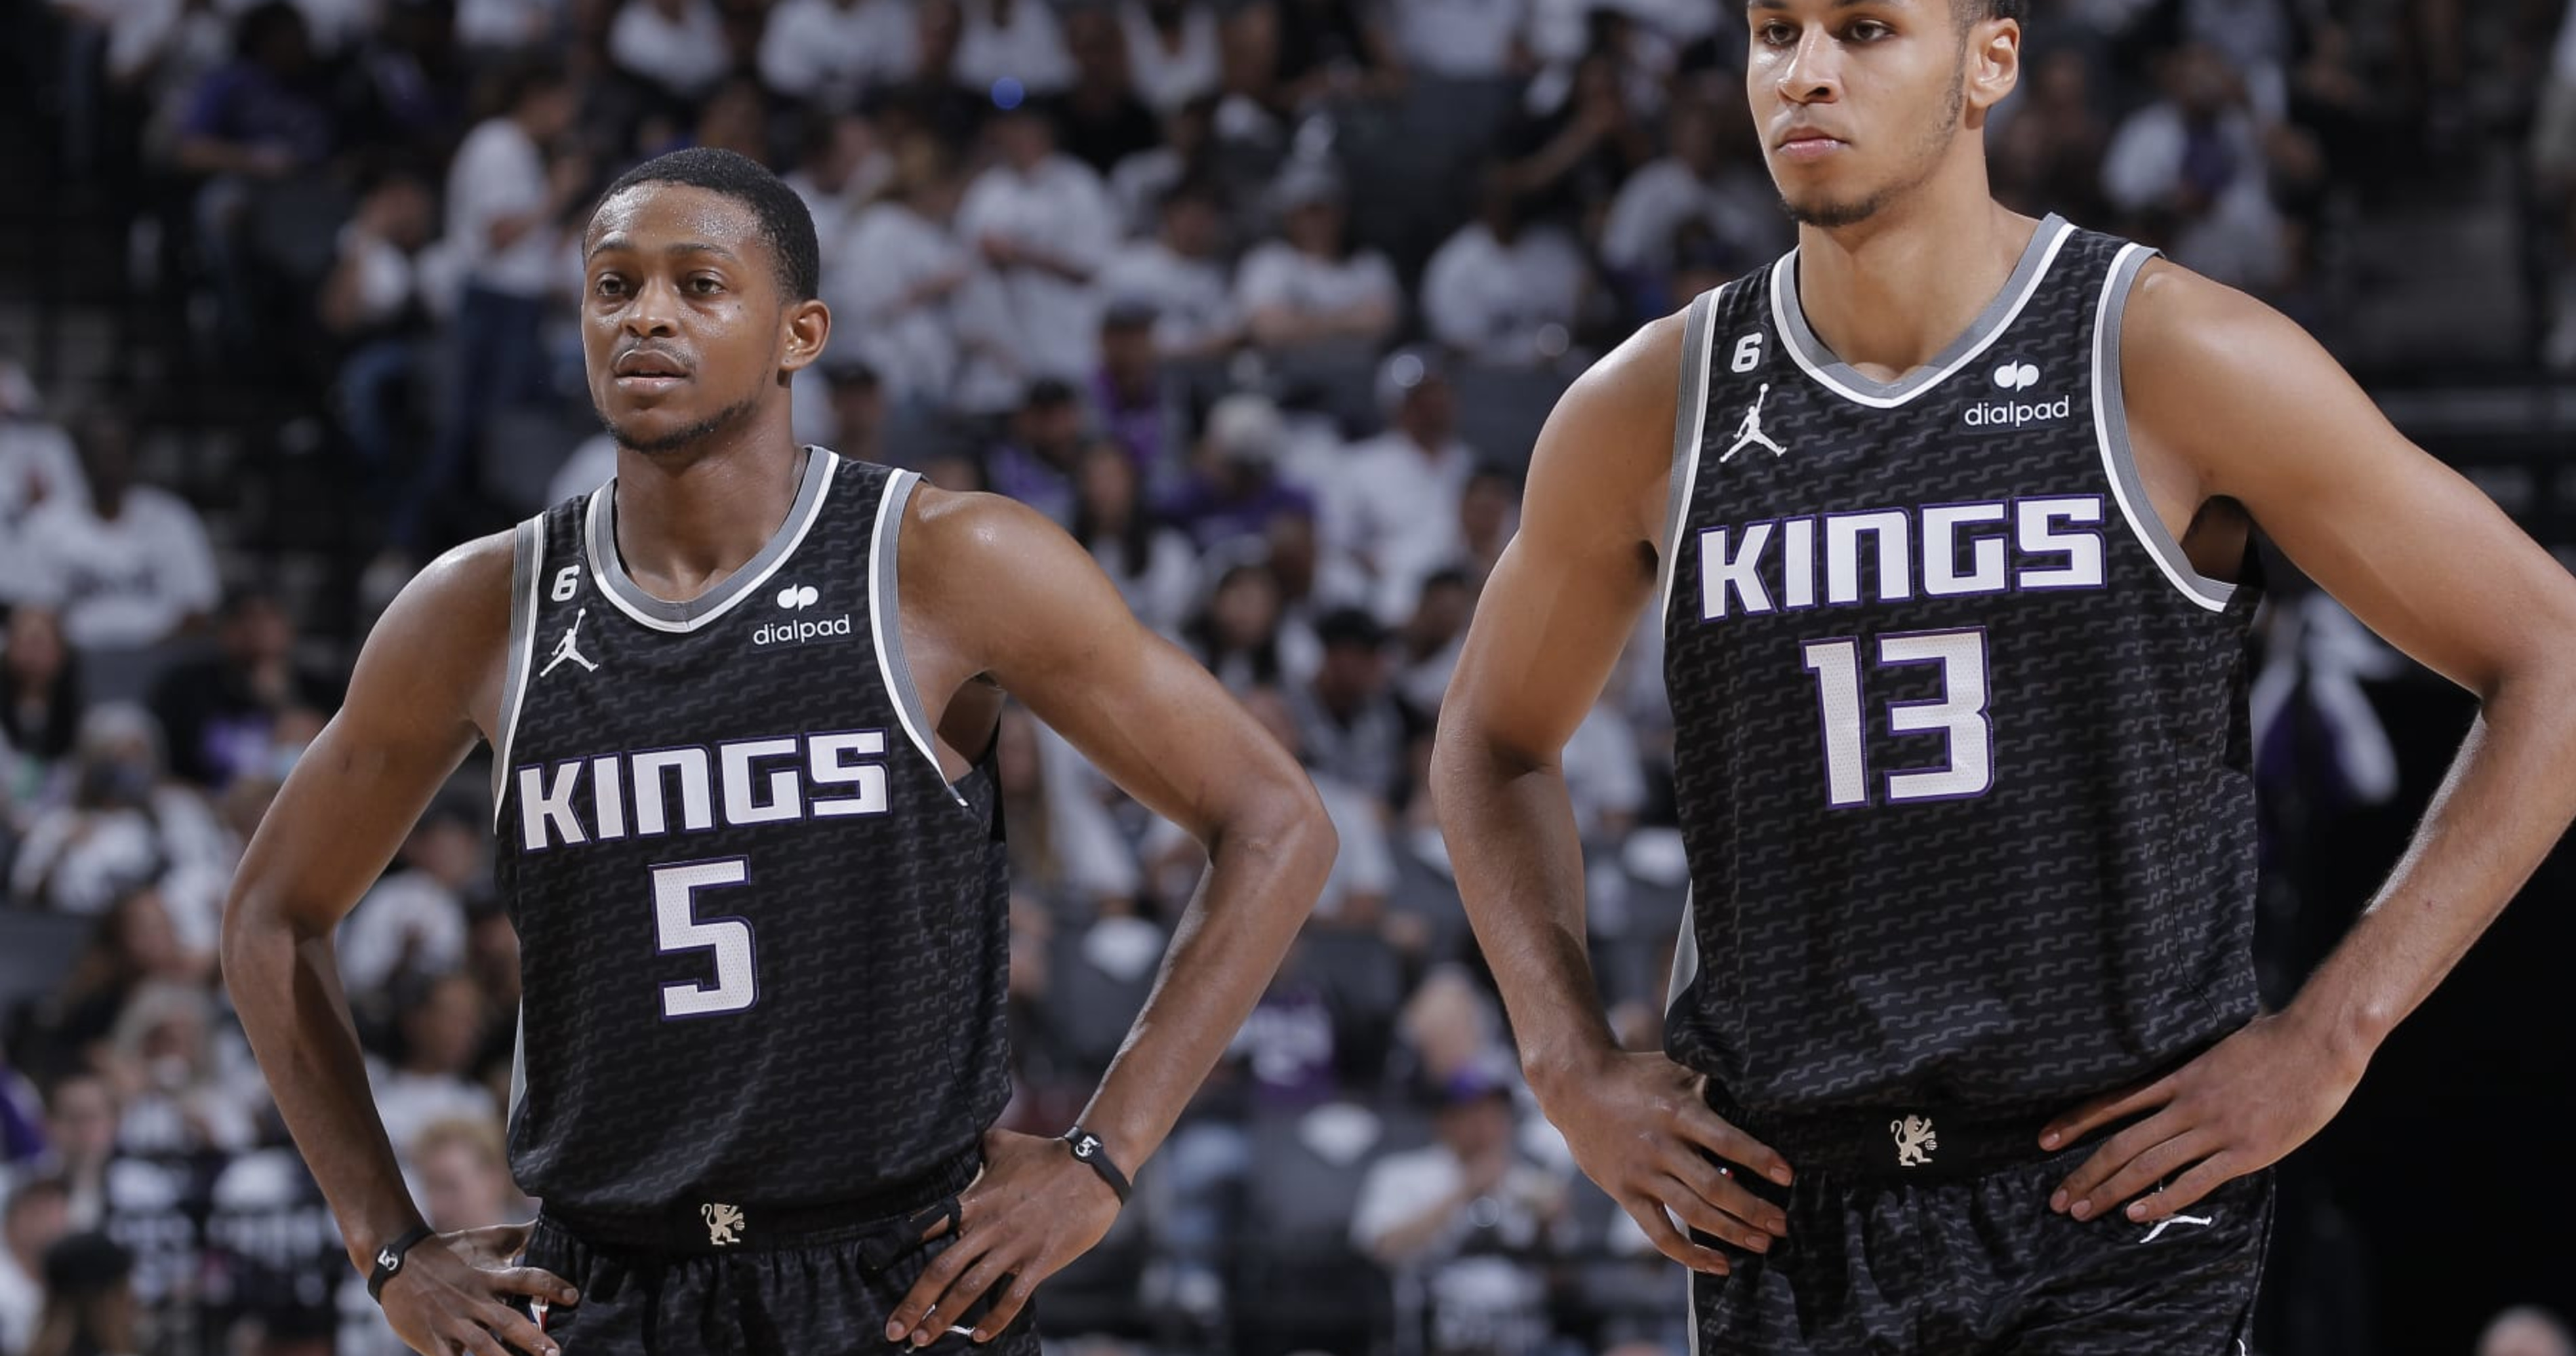 Kings 202324 Schedule Top Games, Championship Odds and Record